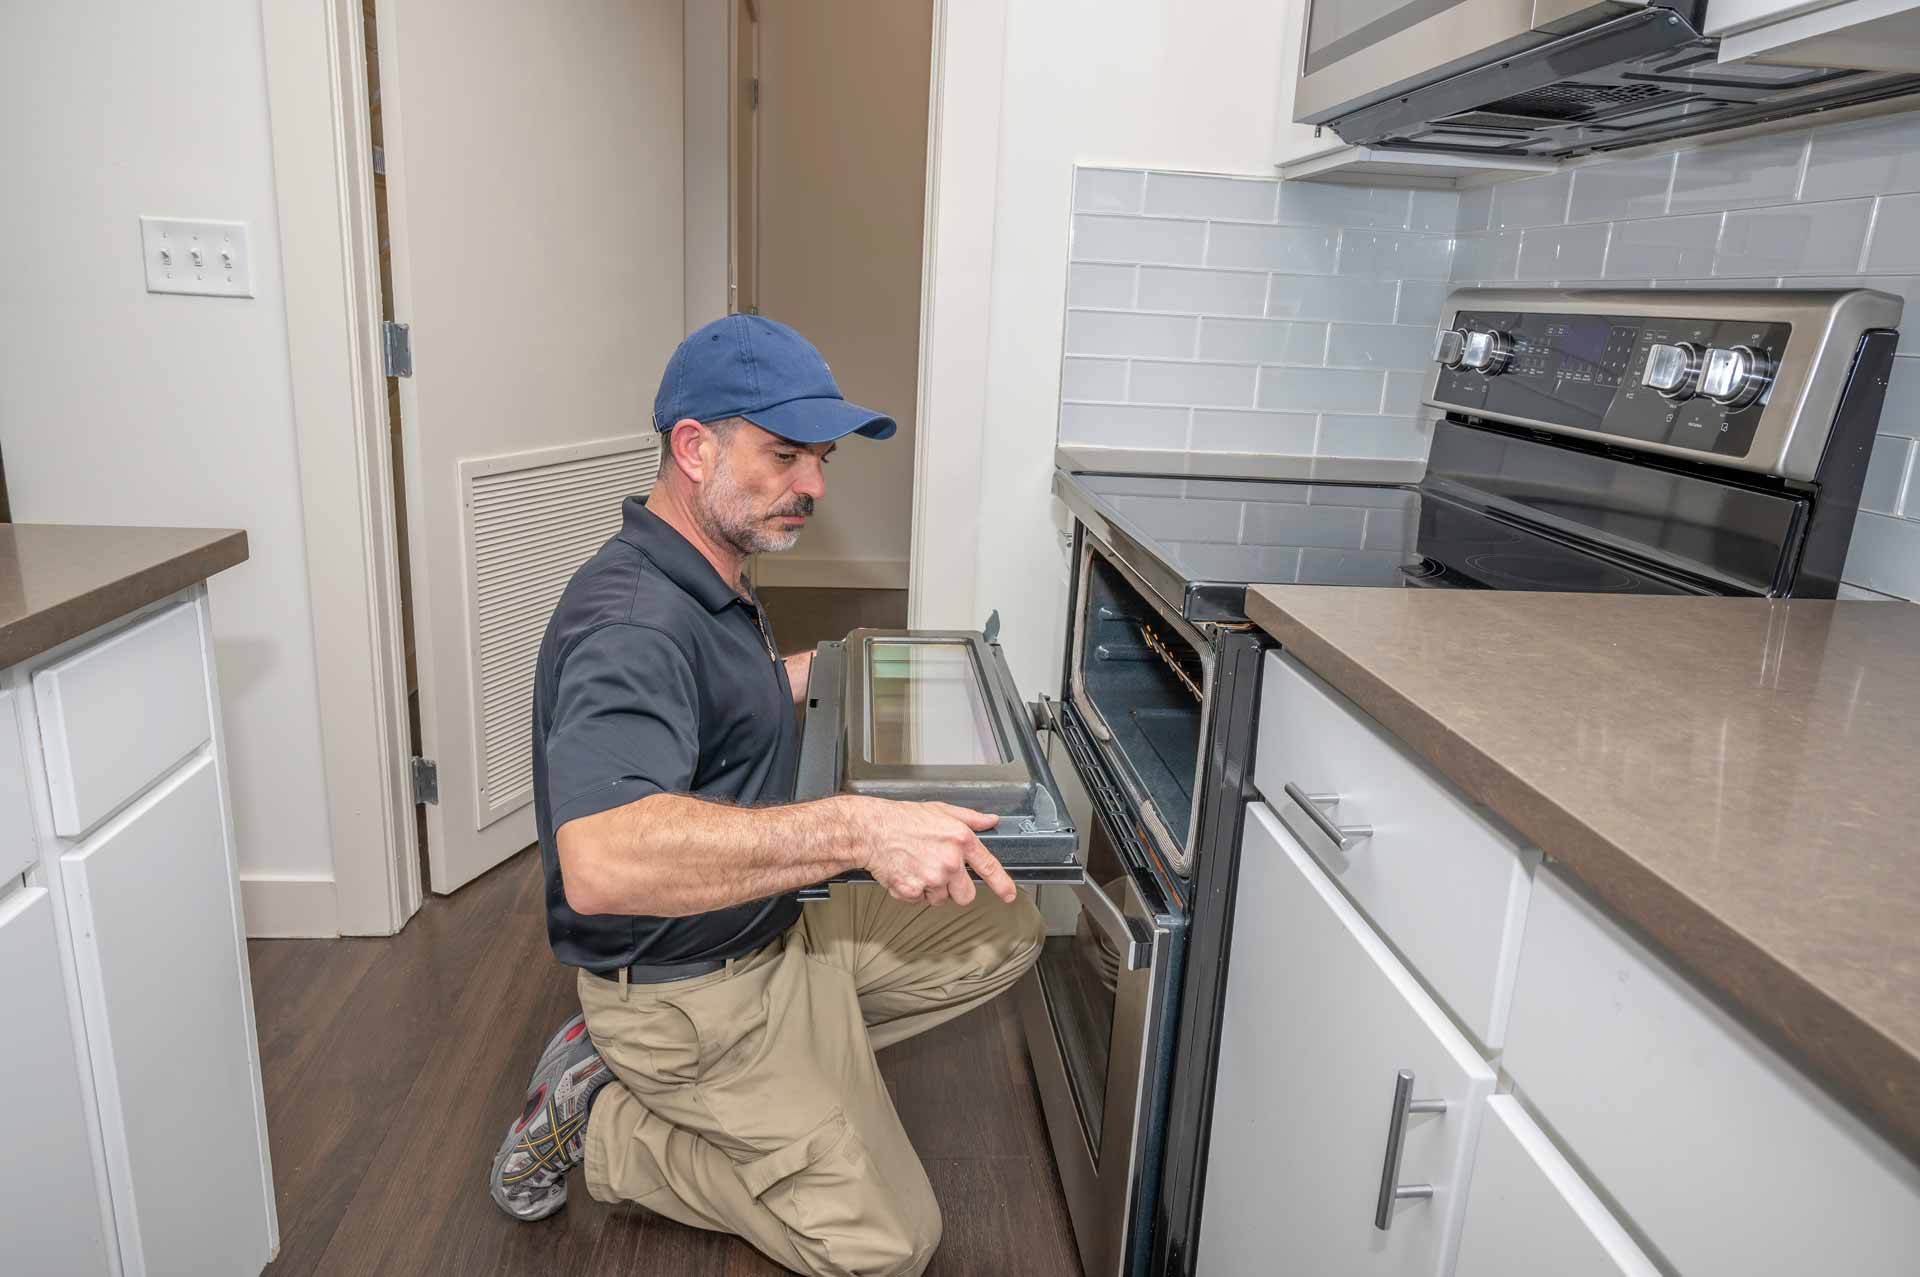 Appliance repair technician removing the door from an oven